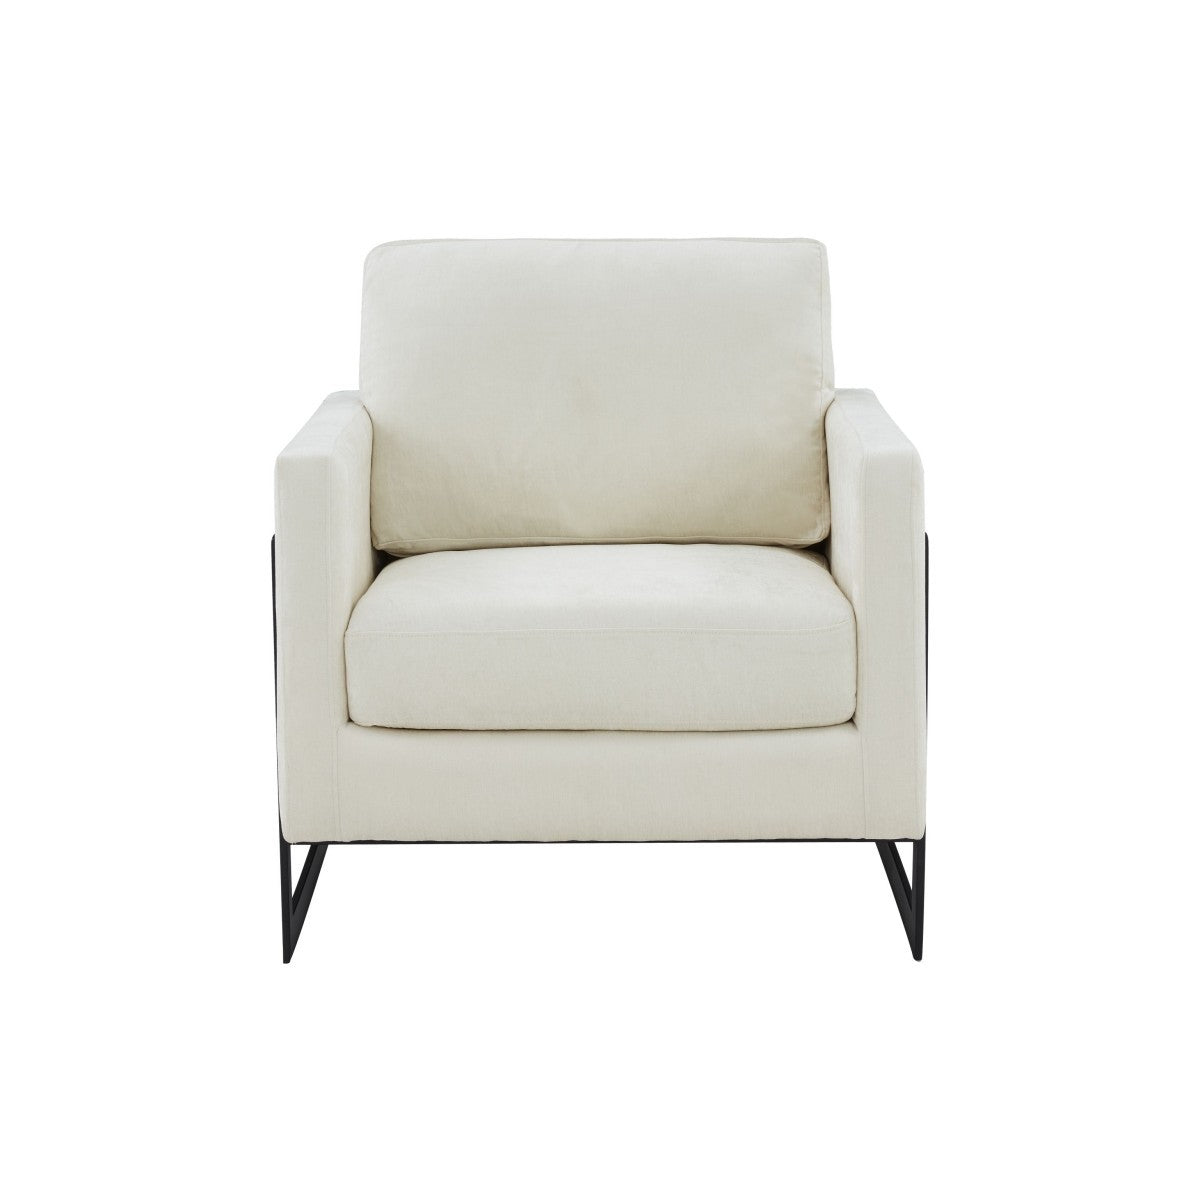 Stylish Cream and Black Fabric Accent Chair